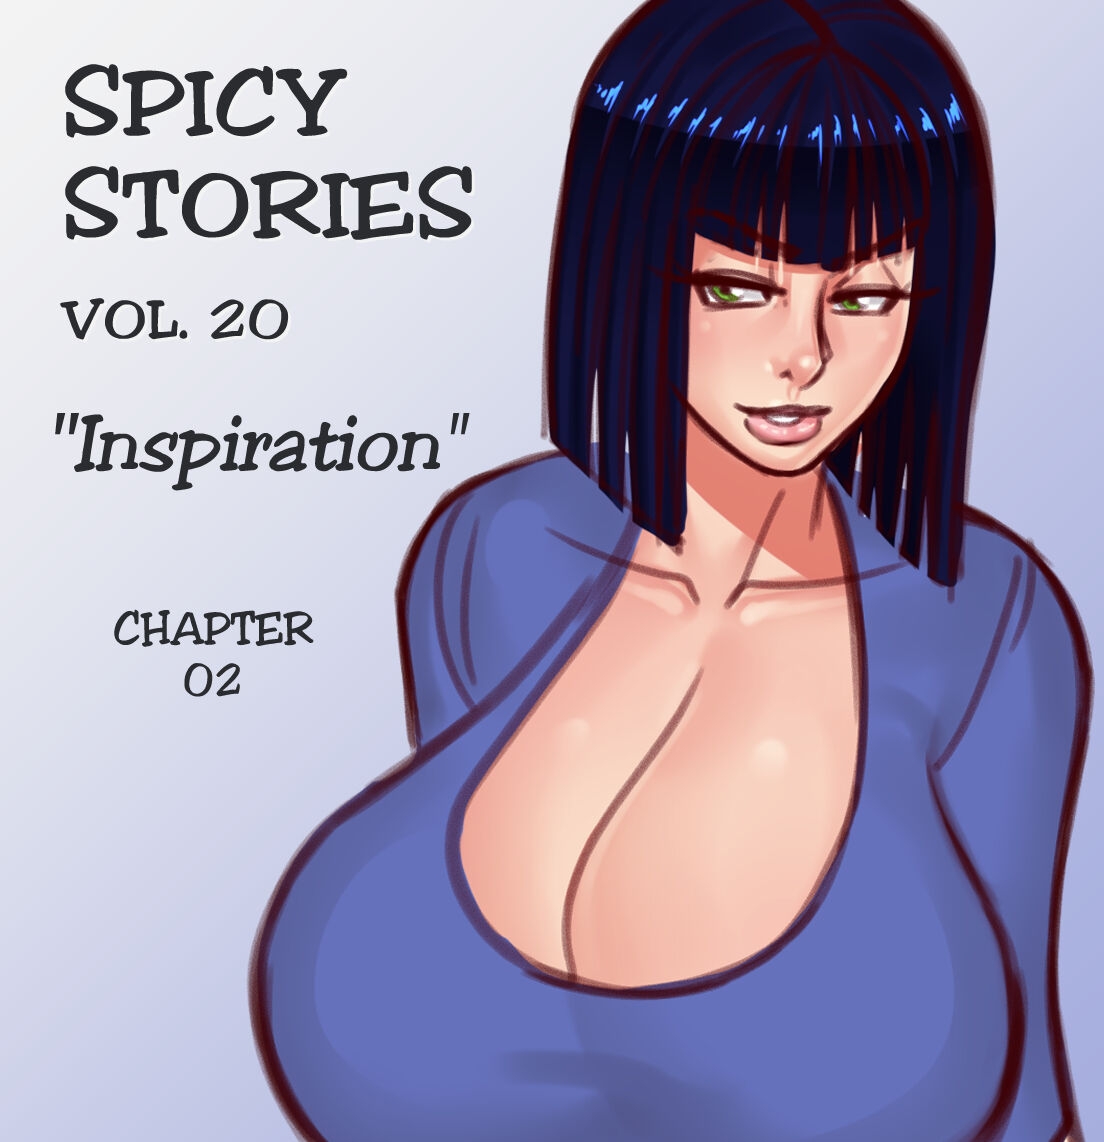 [NGTvisualstudio] NGT Spicy Stories 20 - Inspiration (Ongoing) 55